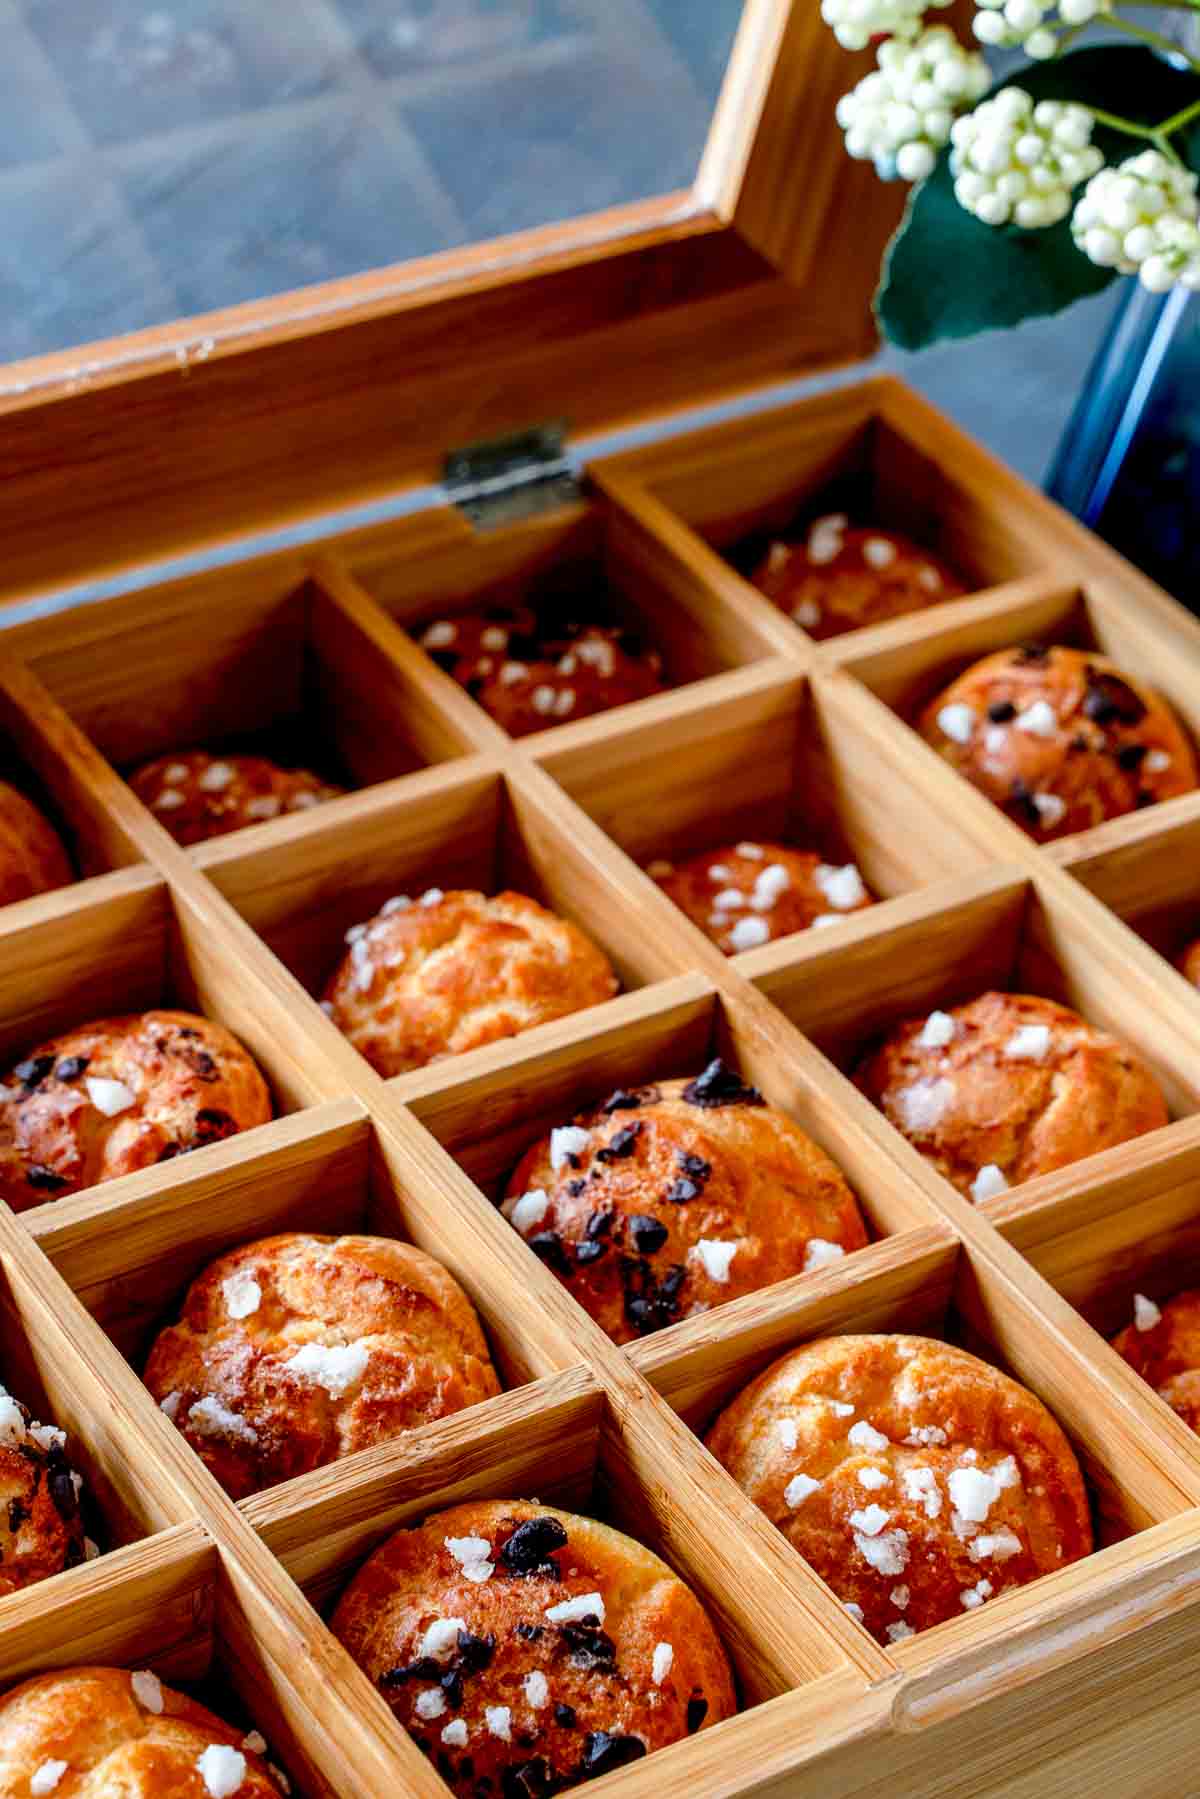 Choux pastry in a compartmentalised wooden box.